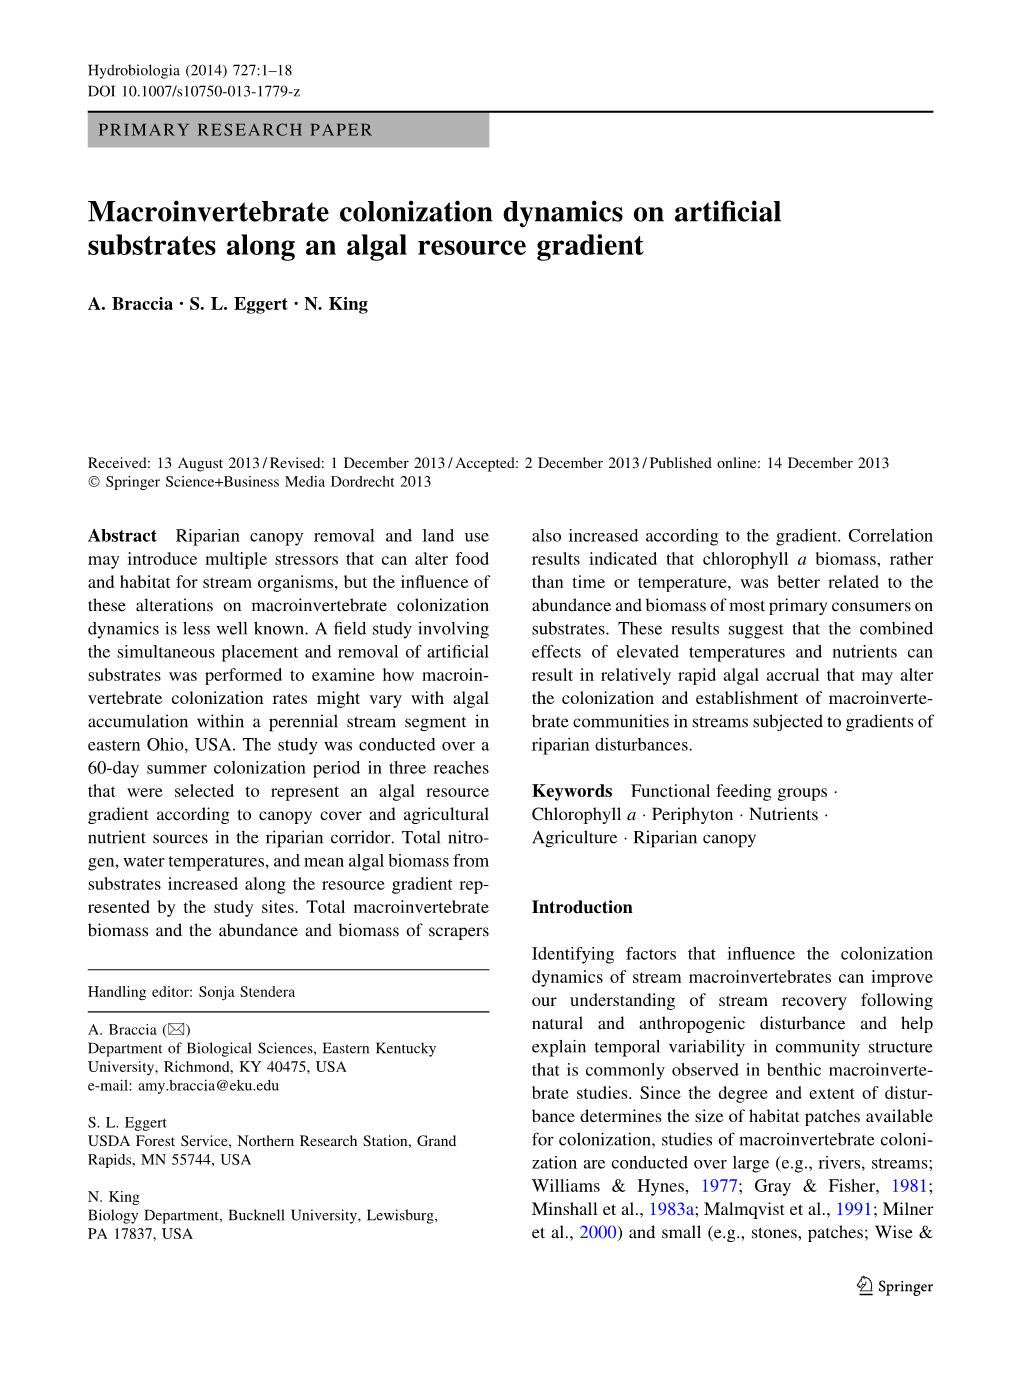 Macroinvertebrate Colonization Dynamics on Artificial Substrates